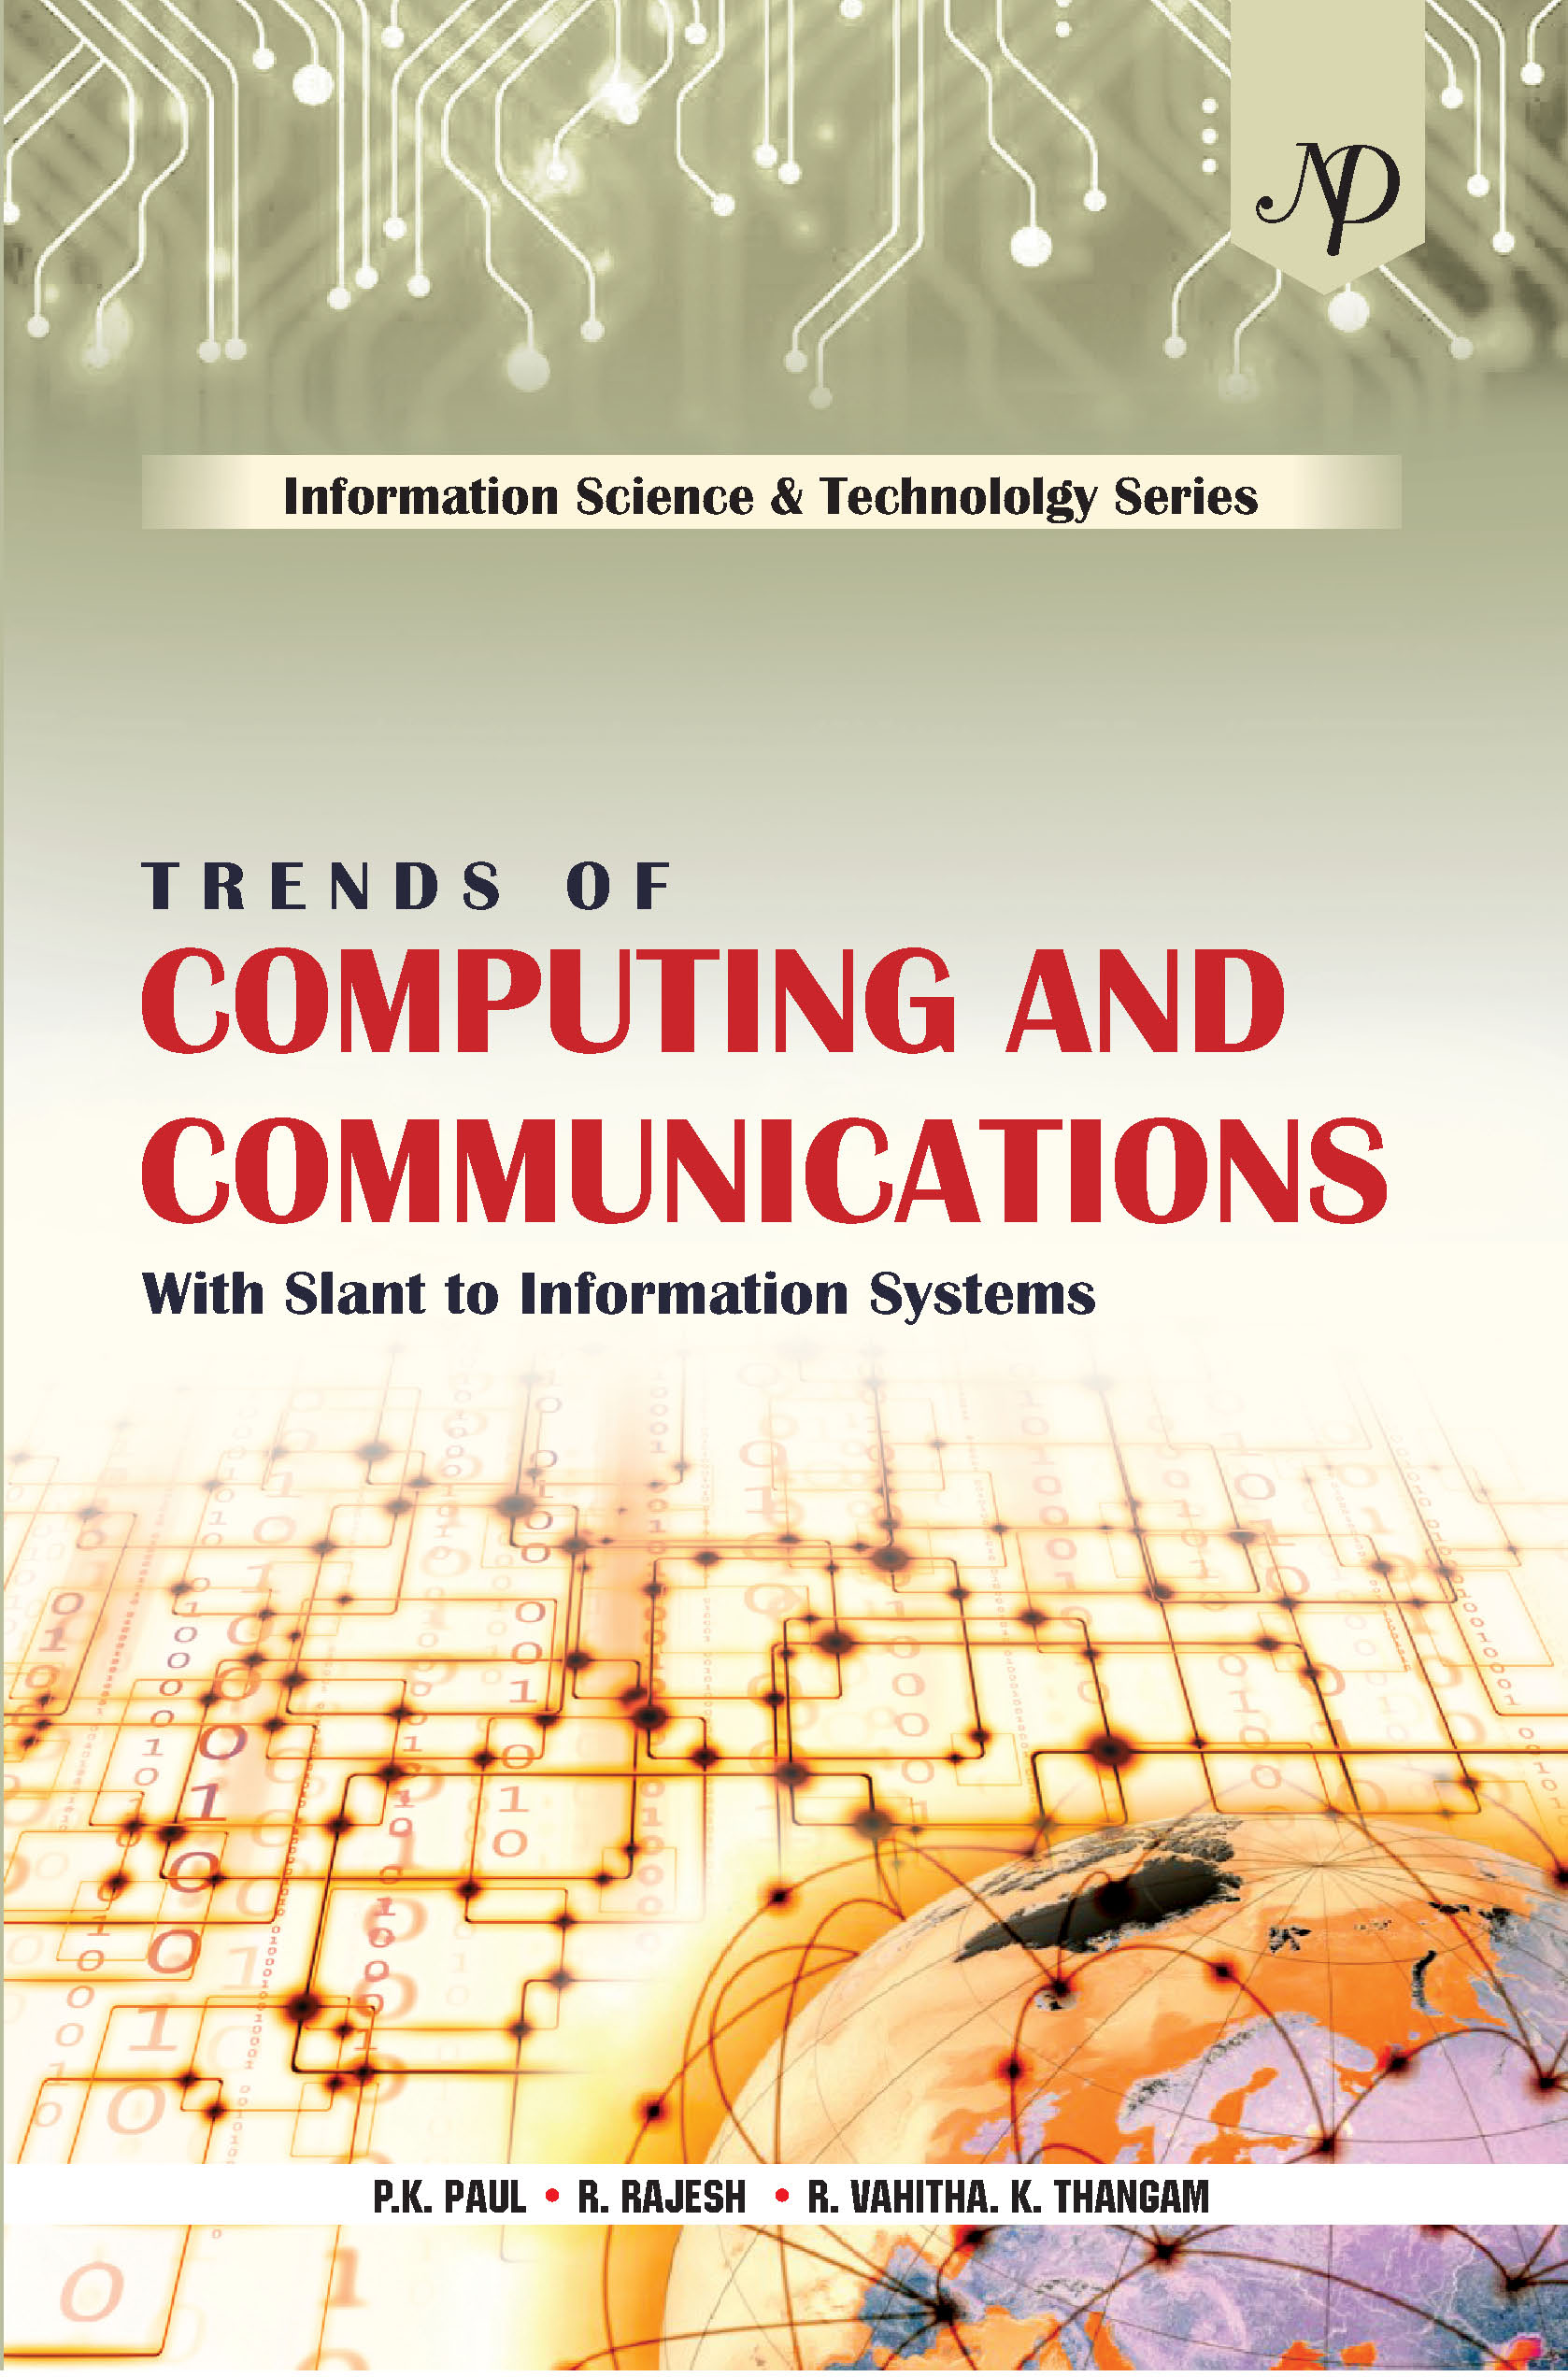 Trends of Computing and communication series by PK Paul.jpg